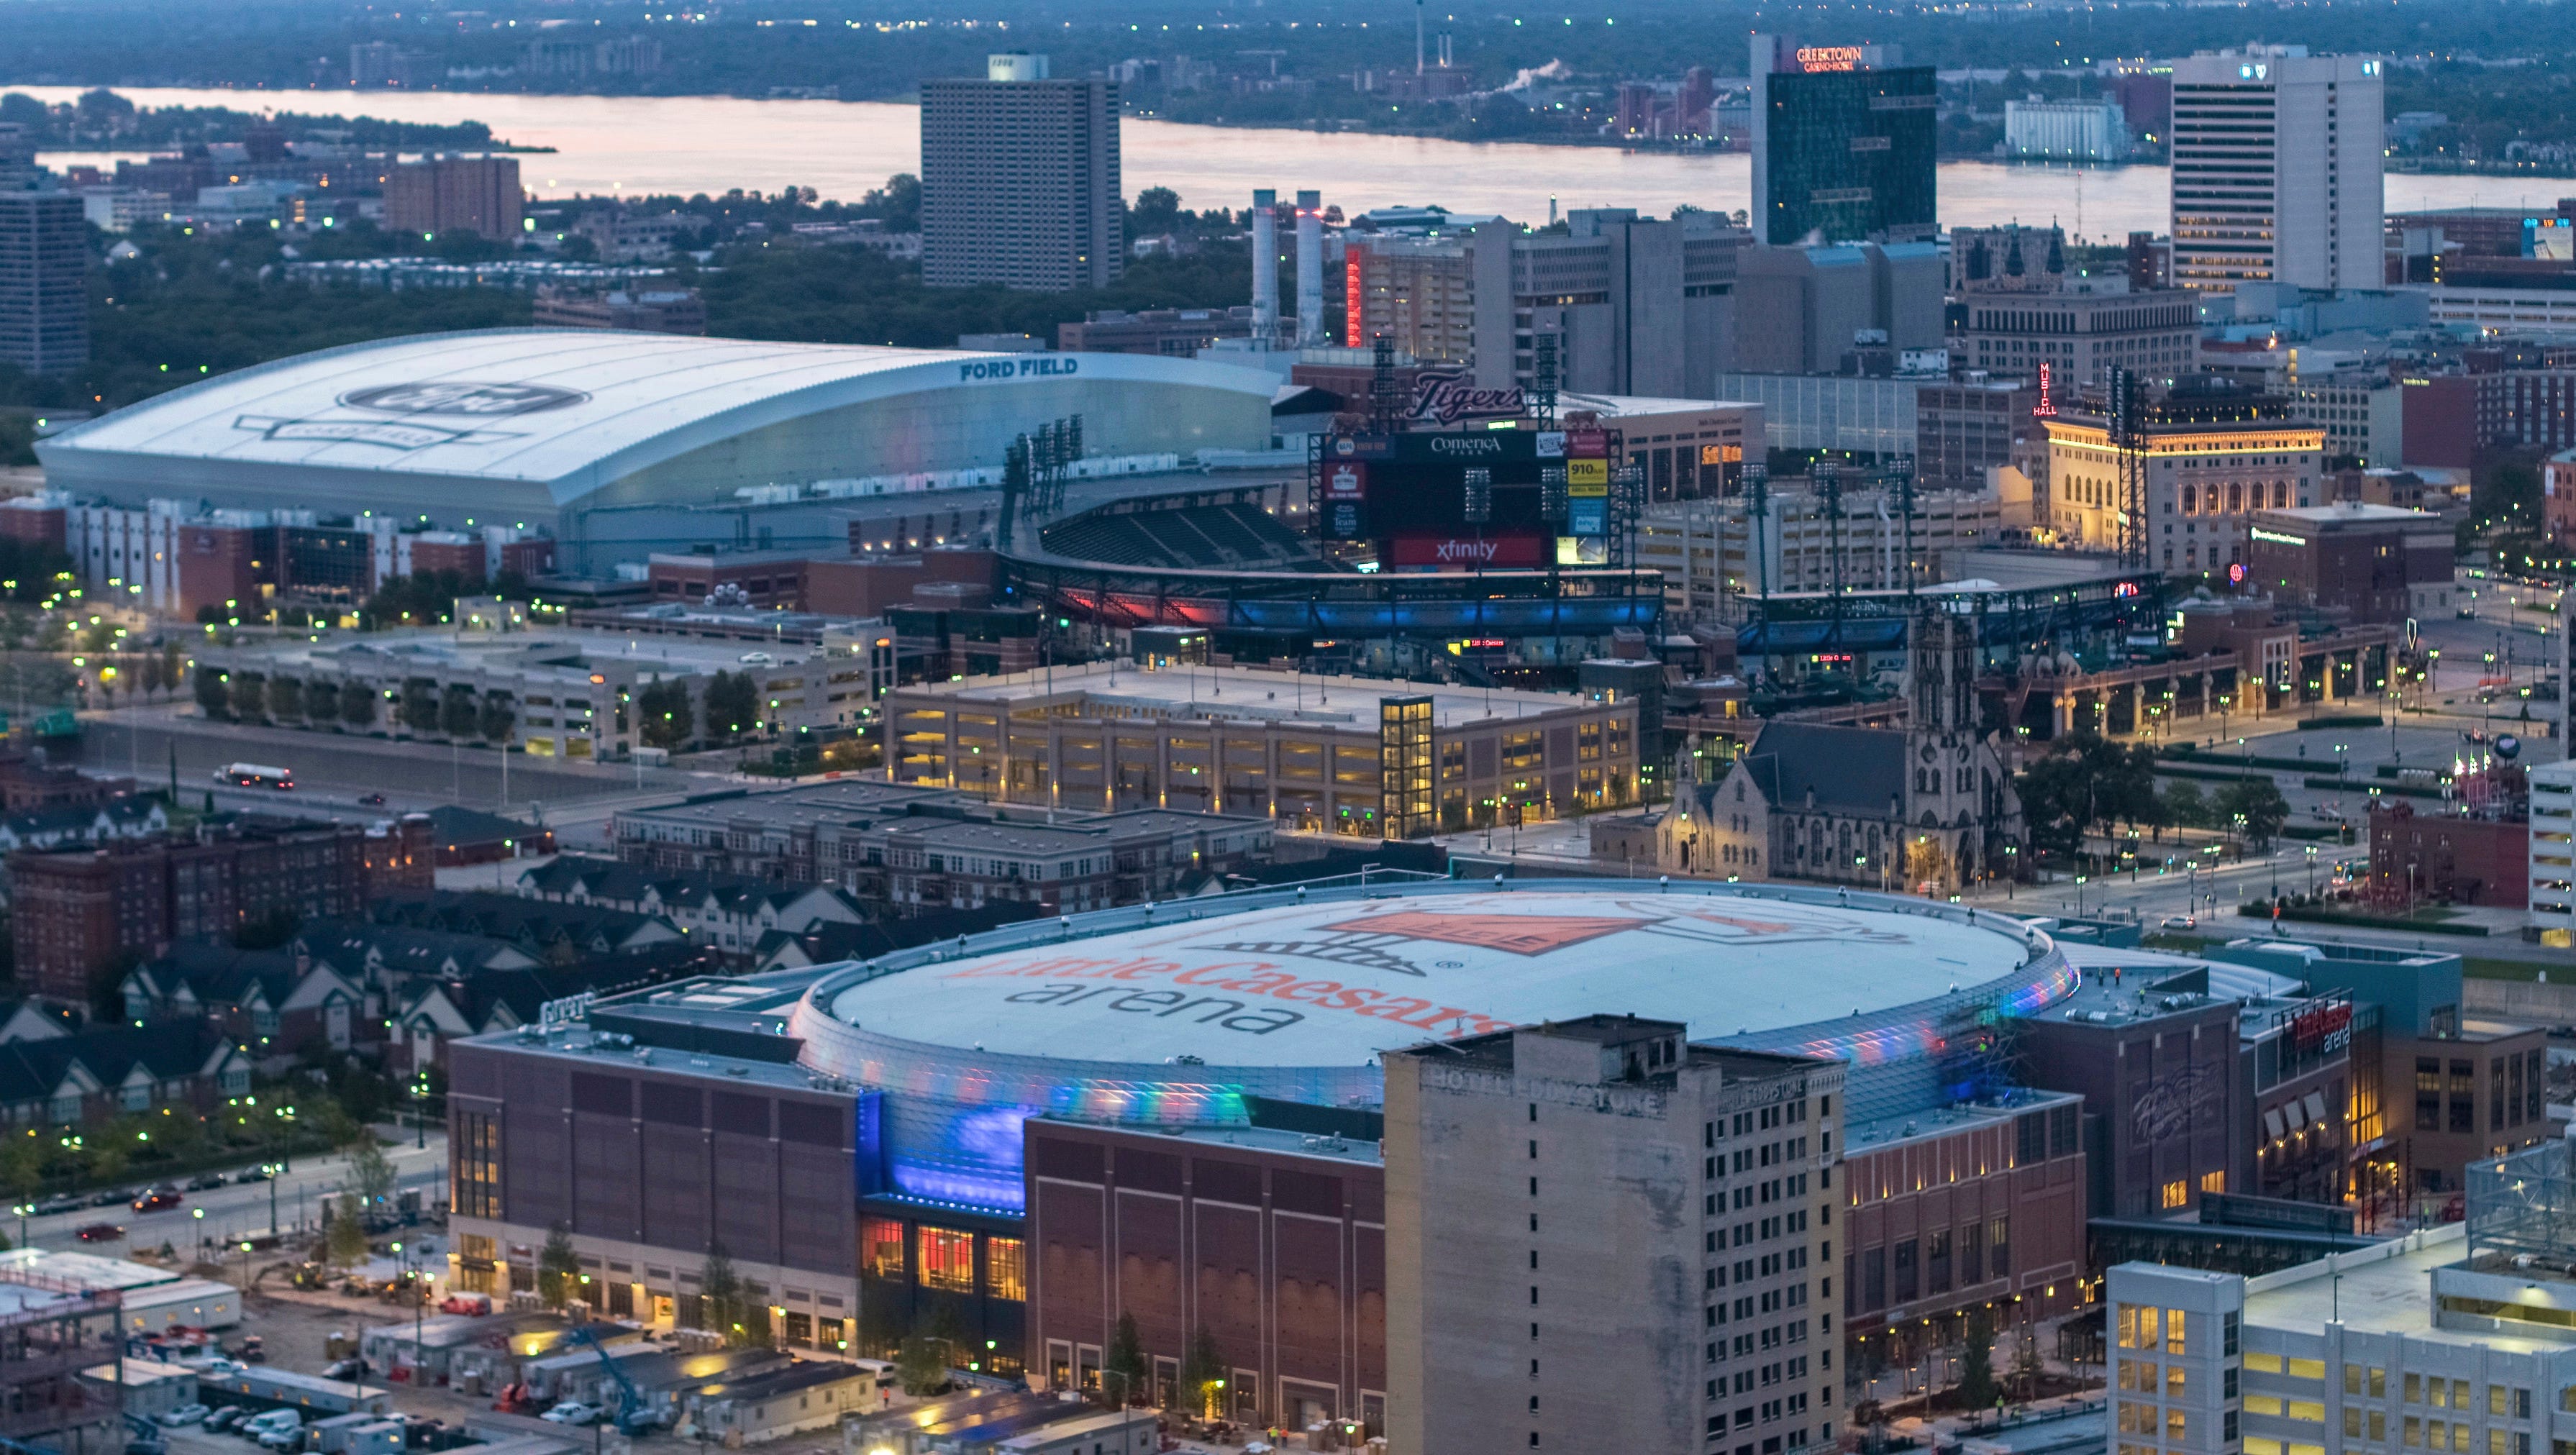 Little Caesars Arena, foreground, is seen in Detroit with Ford Field and Comerica Park in the background.